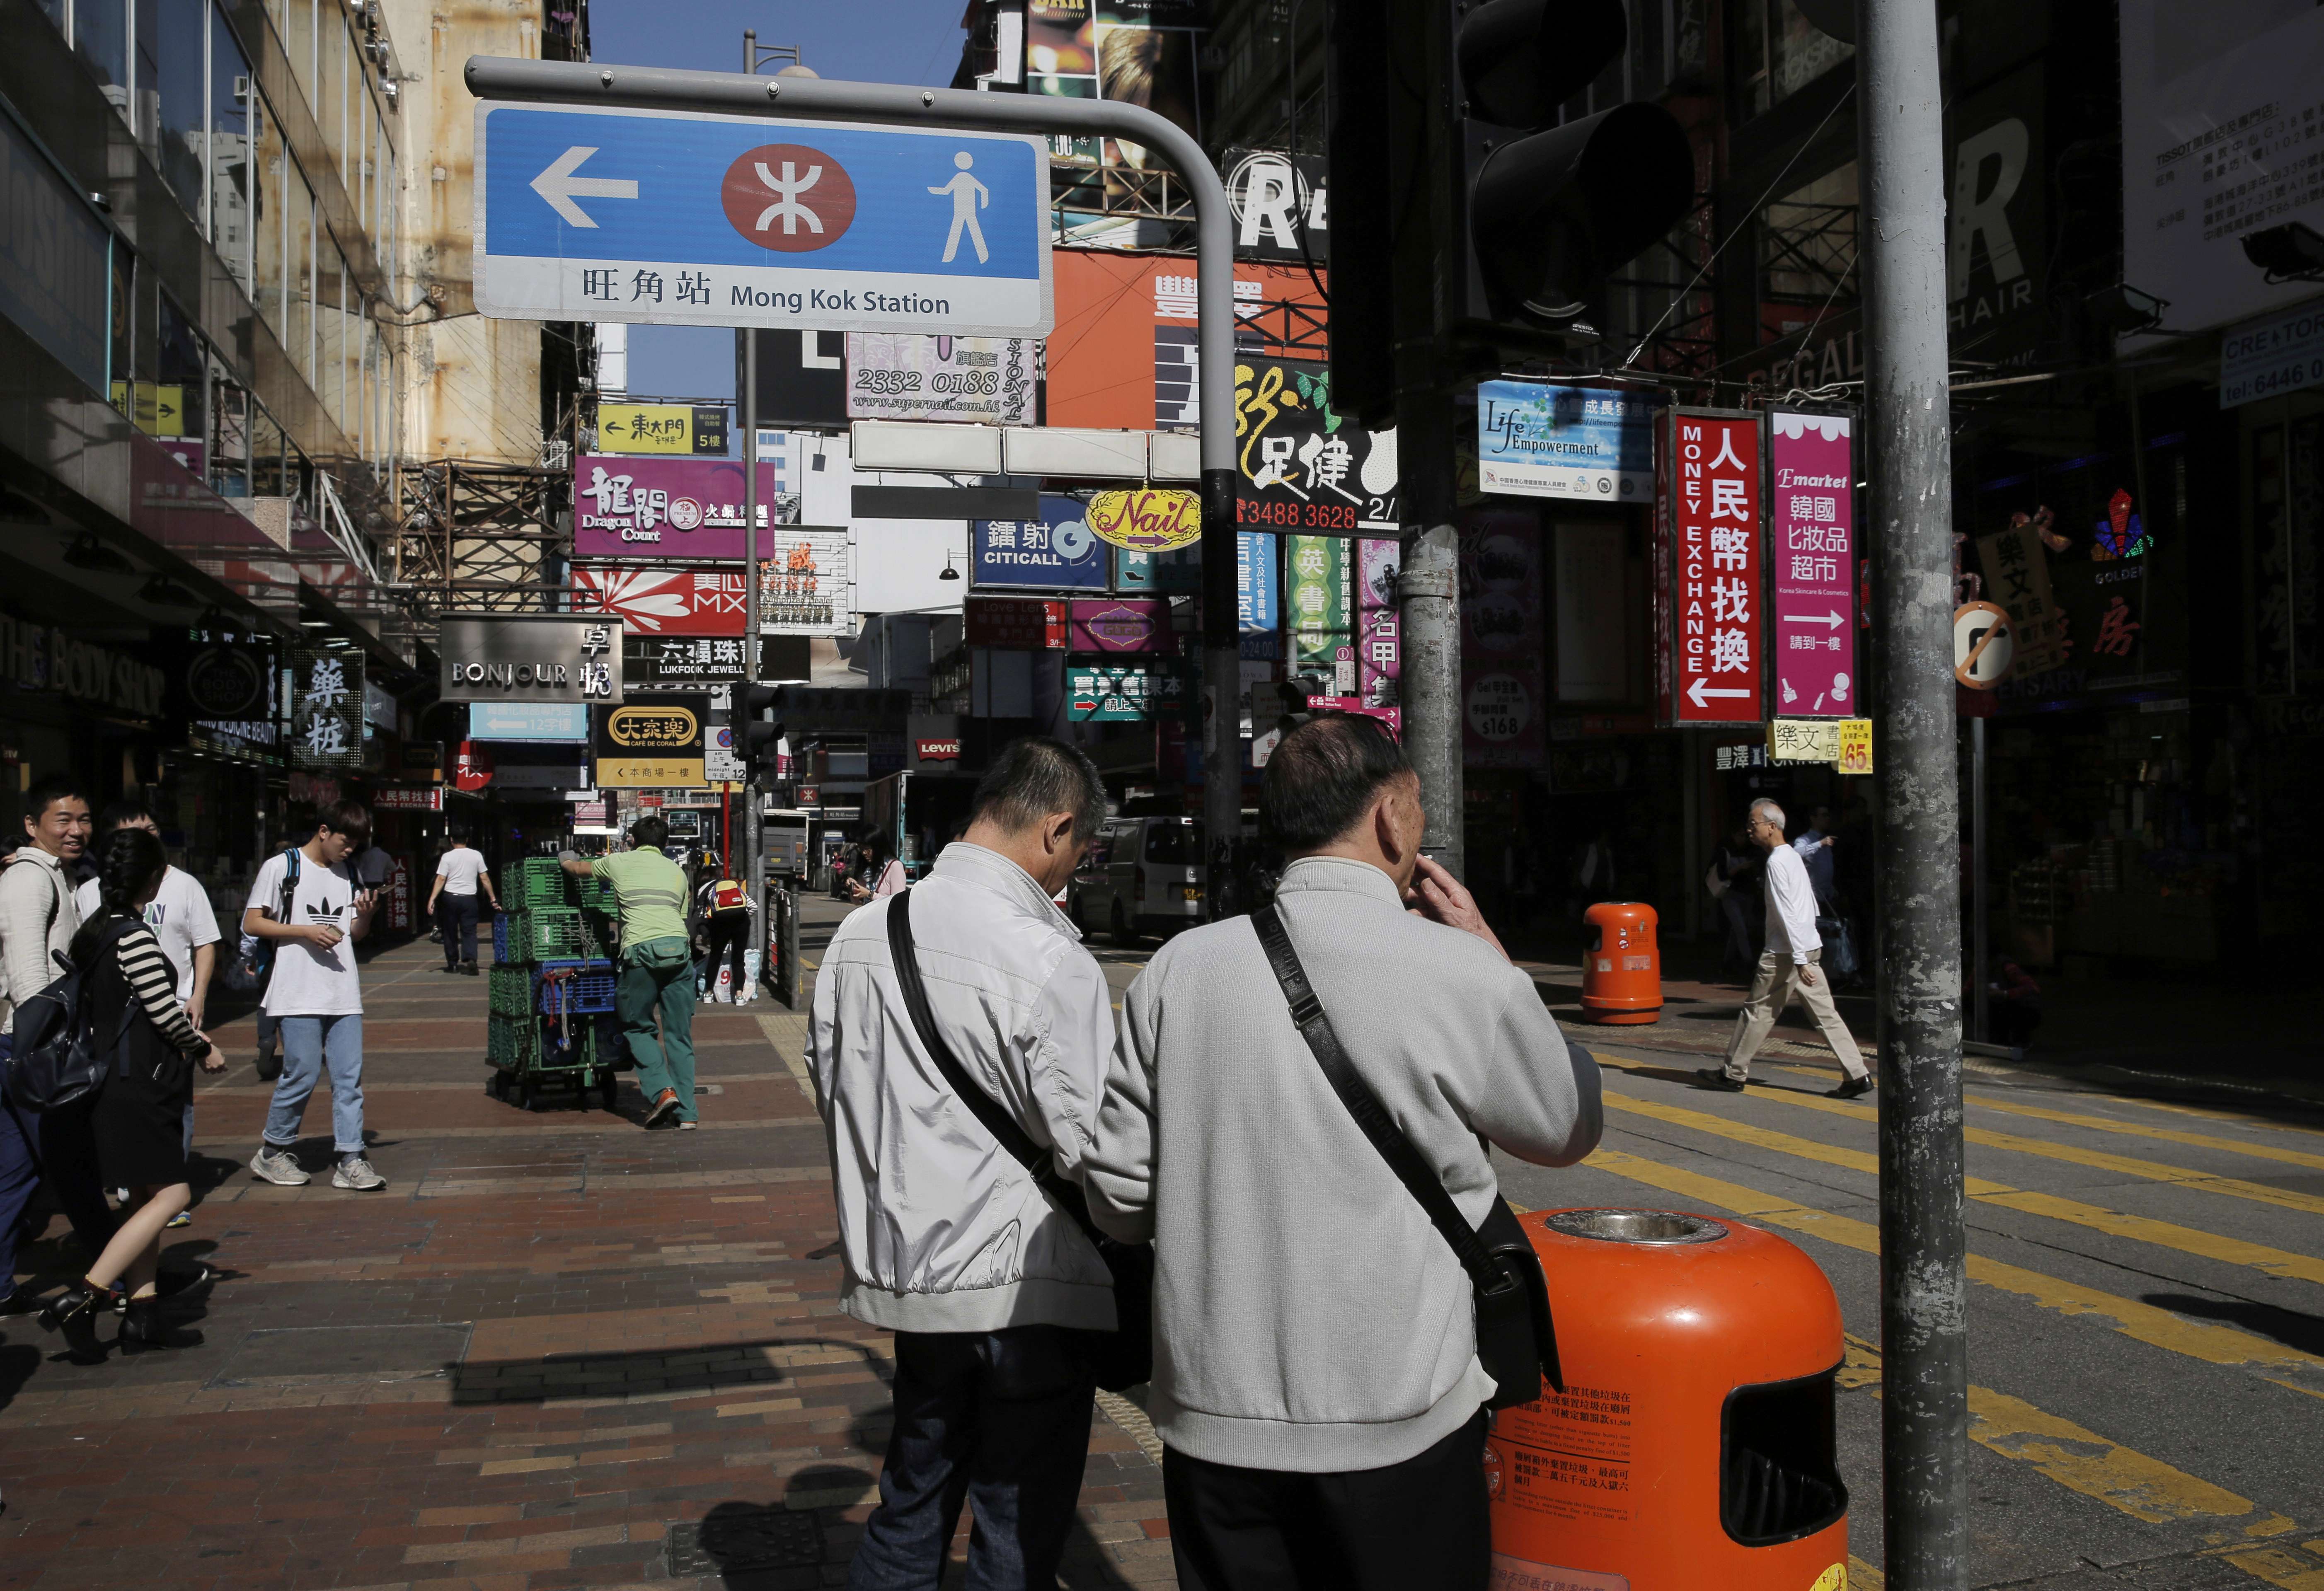 Pedestrians on a Mong Kok street. Housing, transport and economic development are important. But the government should be cautioned against falling back on an outdated mode of urban planning that focuses only on hardware – mostly for vehicles – while ignoring the software that makes life bearable for the average person on the pavement. Photo: AP